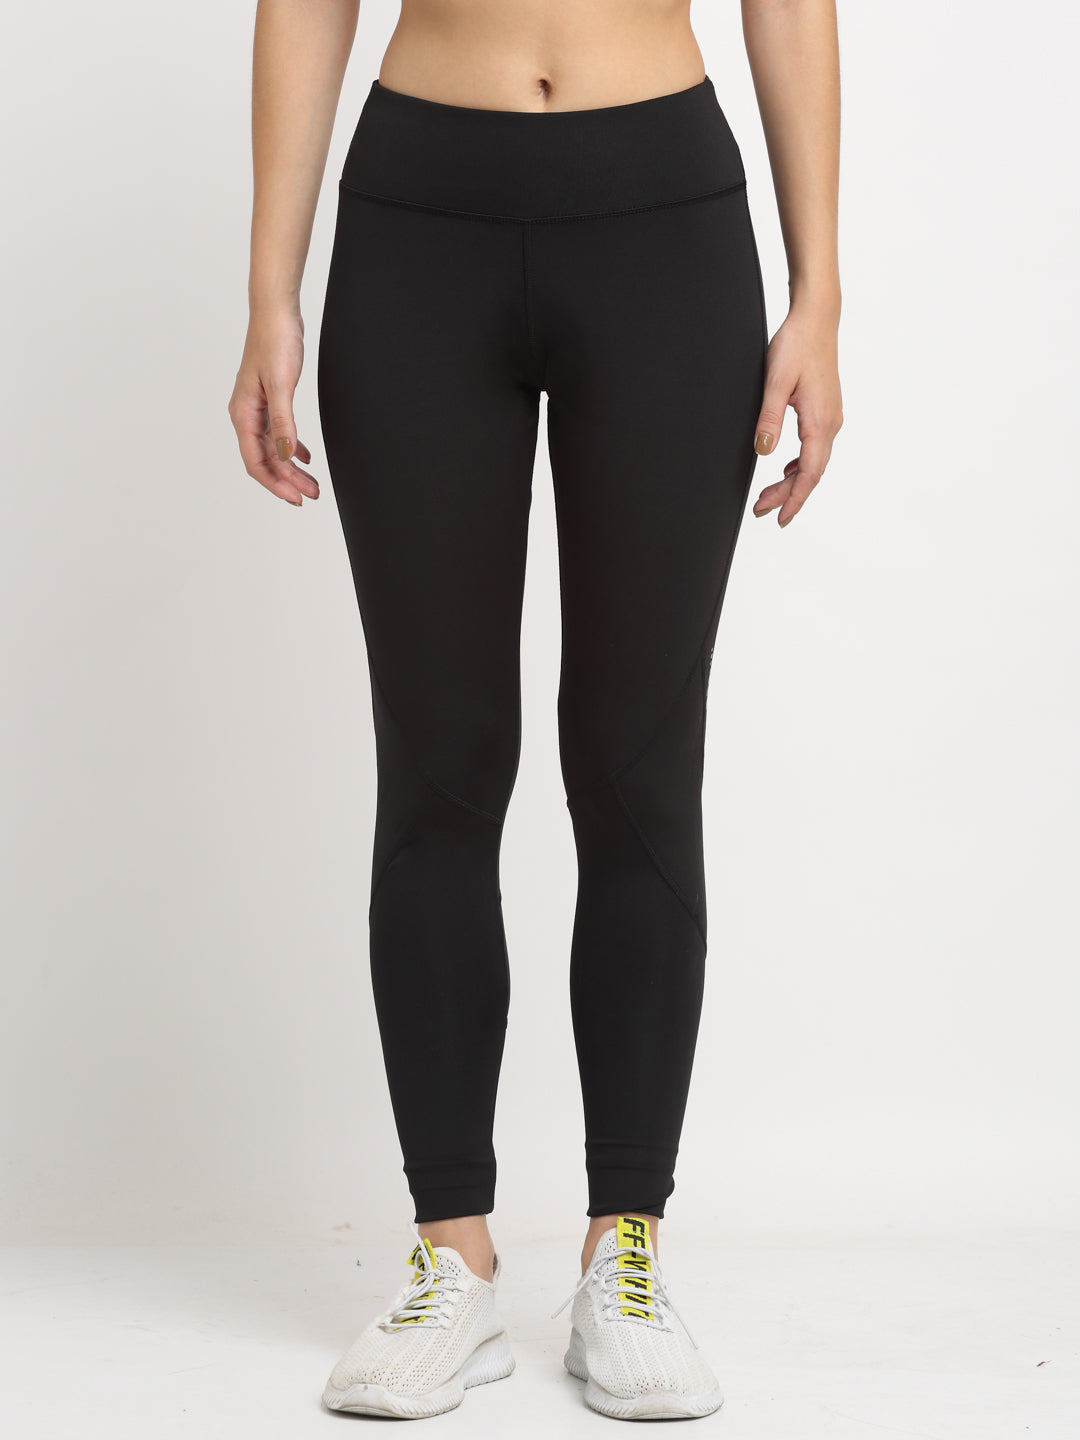 High Waisted Workout Leggings | Old Navy